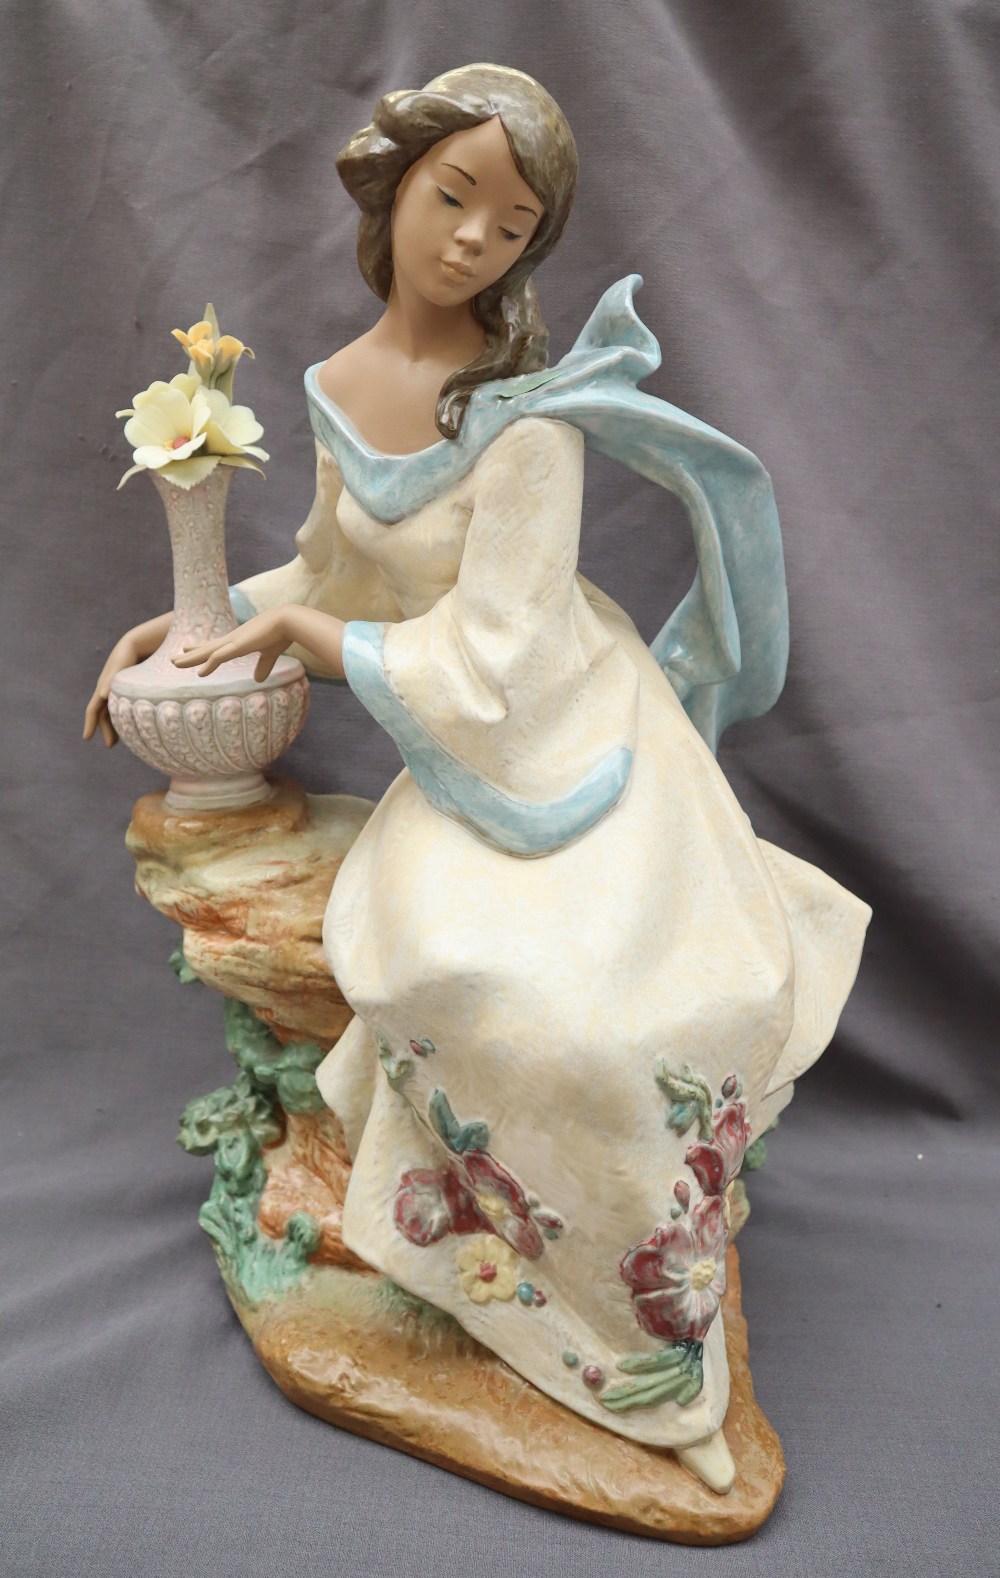 A Lladro Privilege Garden Breeze limited edition figure by Francisco Polope,